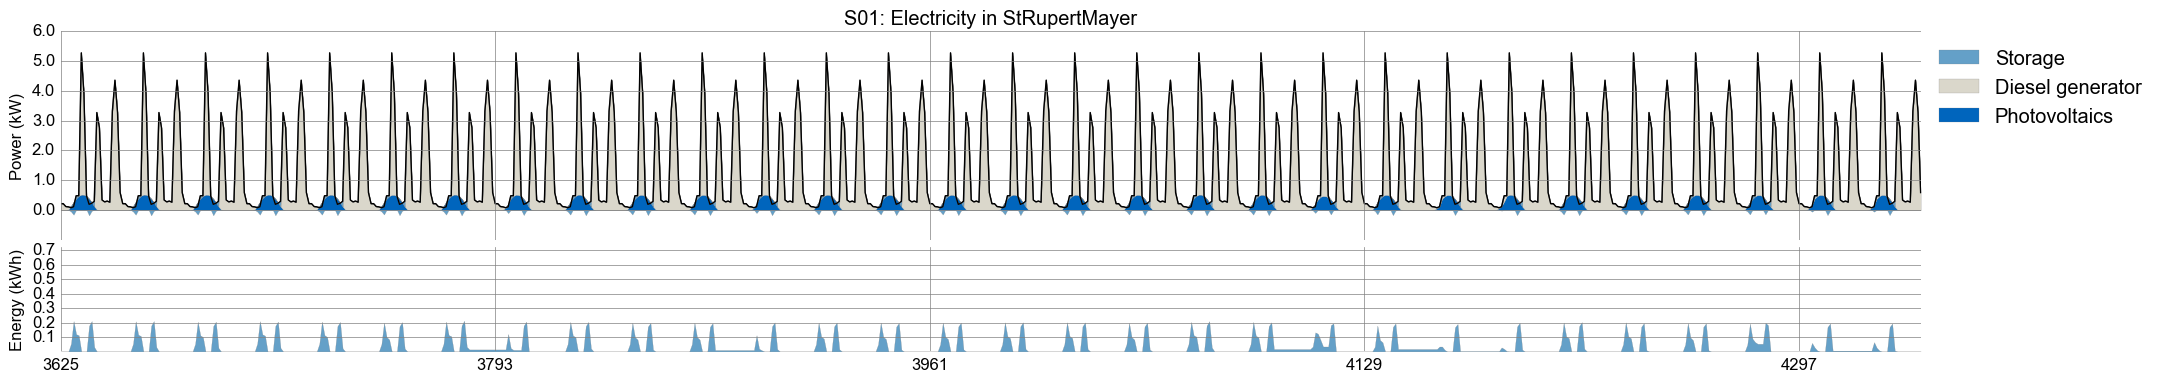 Timeseries plot of month June for electricity generation in scenario s01: diesel generator covers main load, only slightly supported by photovoltaics during the day.